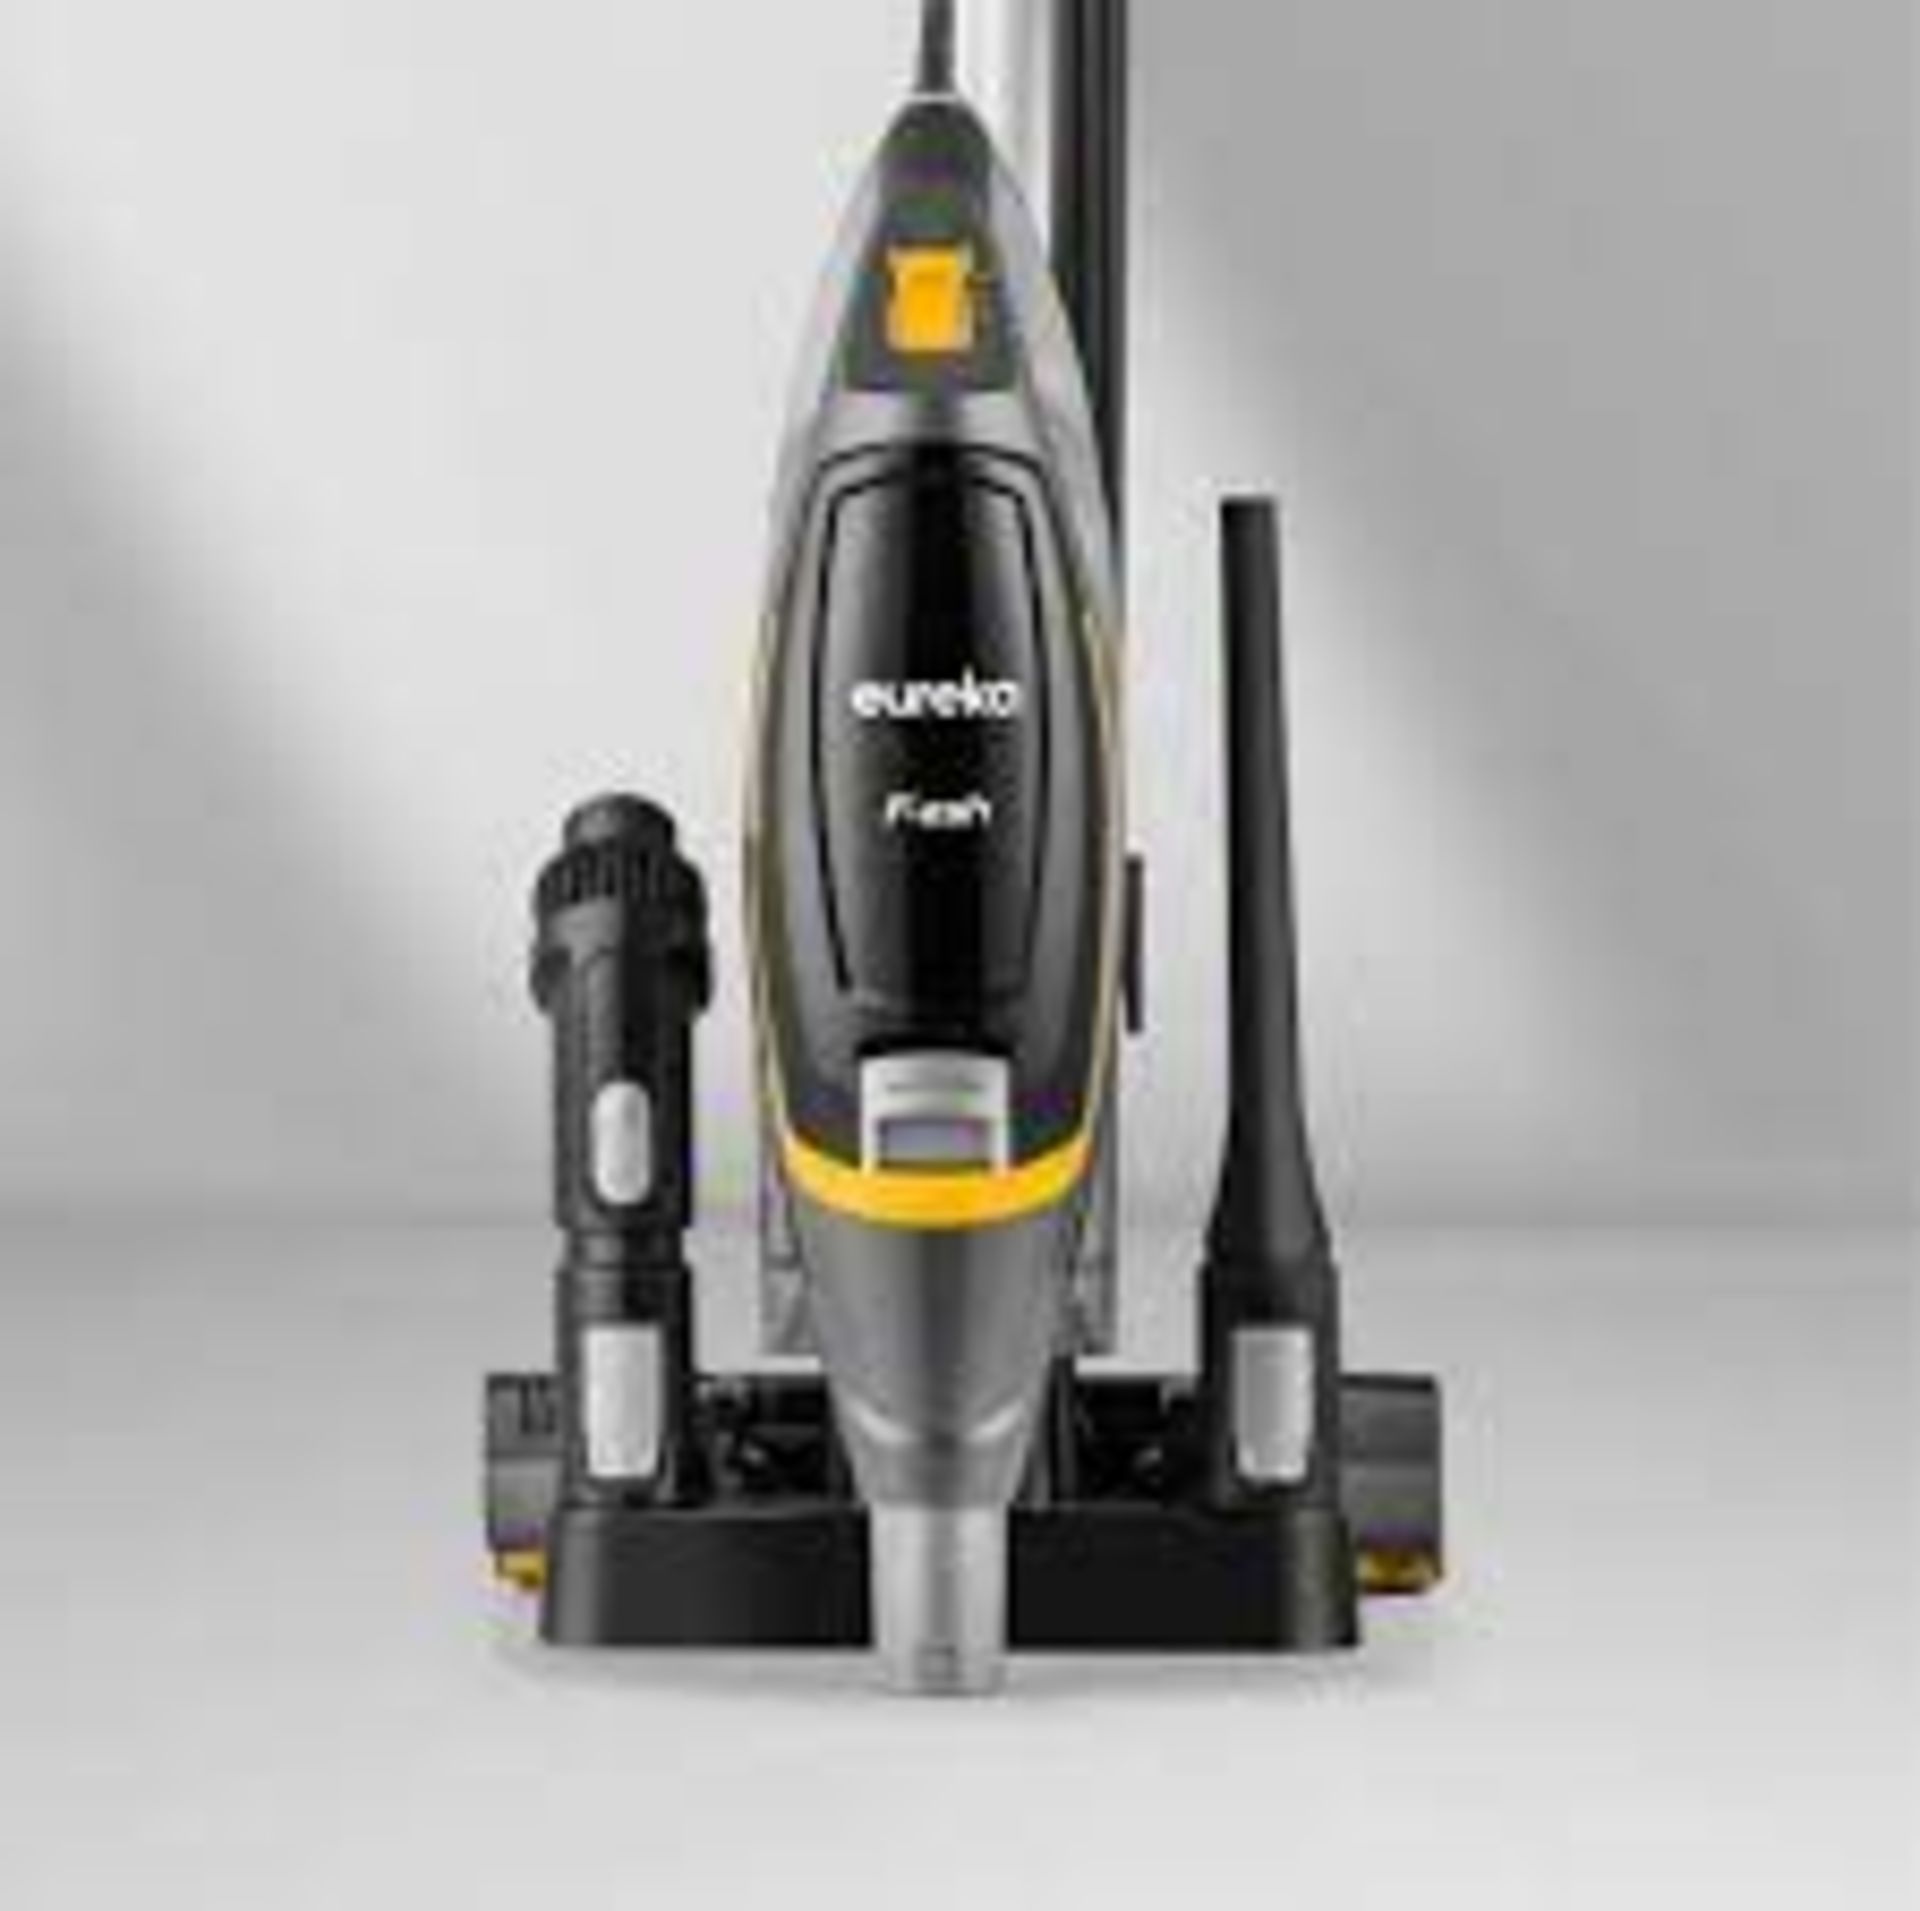 3 X BRAND NEW Eureka NES510 2-in-1 Corded Stick & Handheld Vacuum Cleaner, 400W Motor for Whole - Image 3 of 3